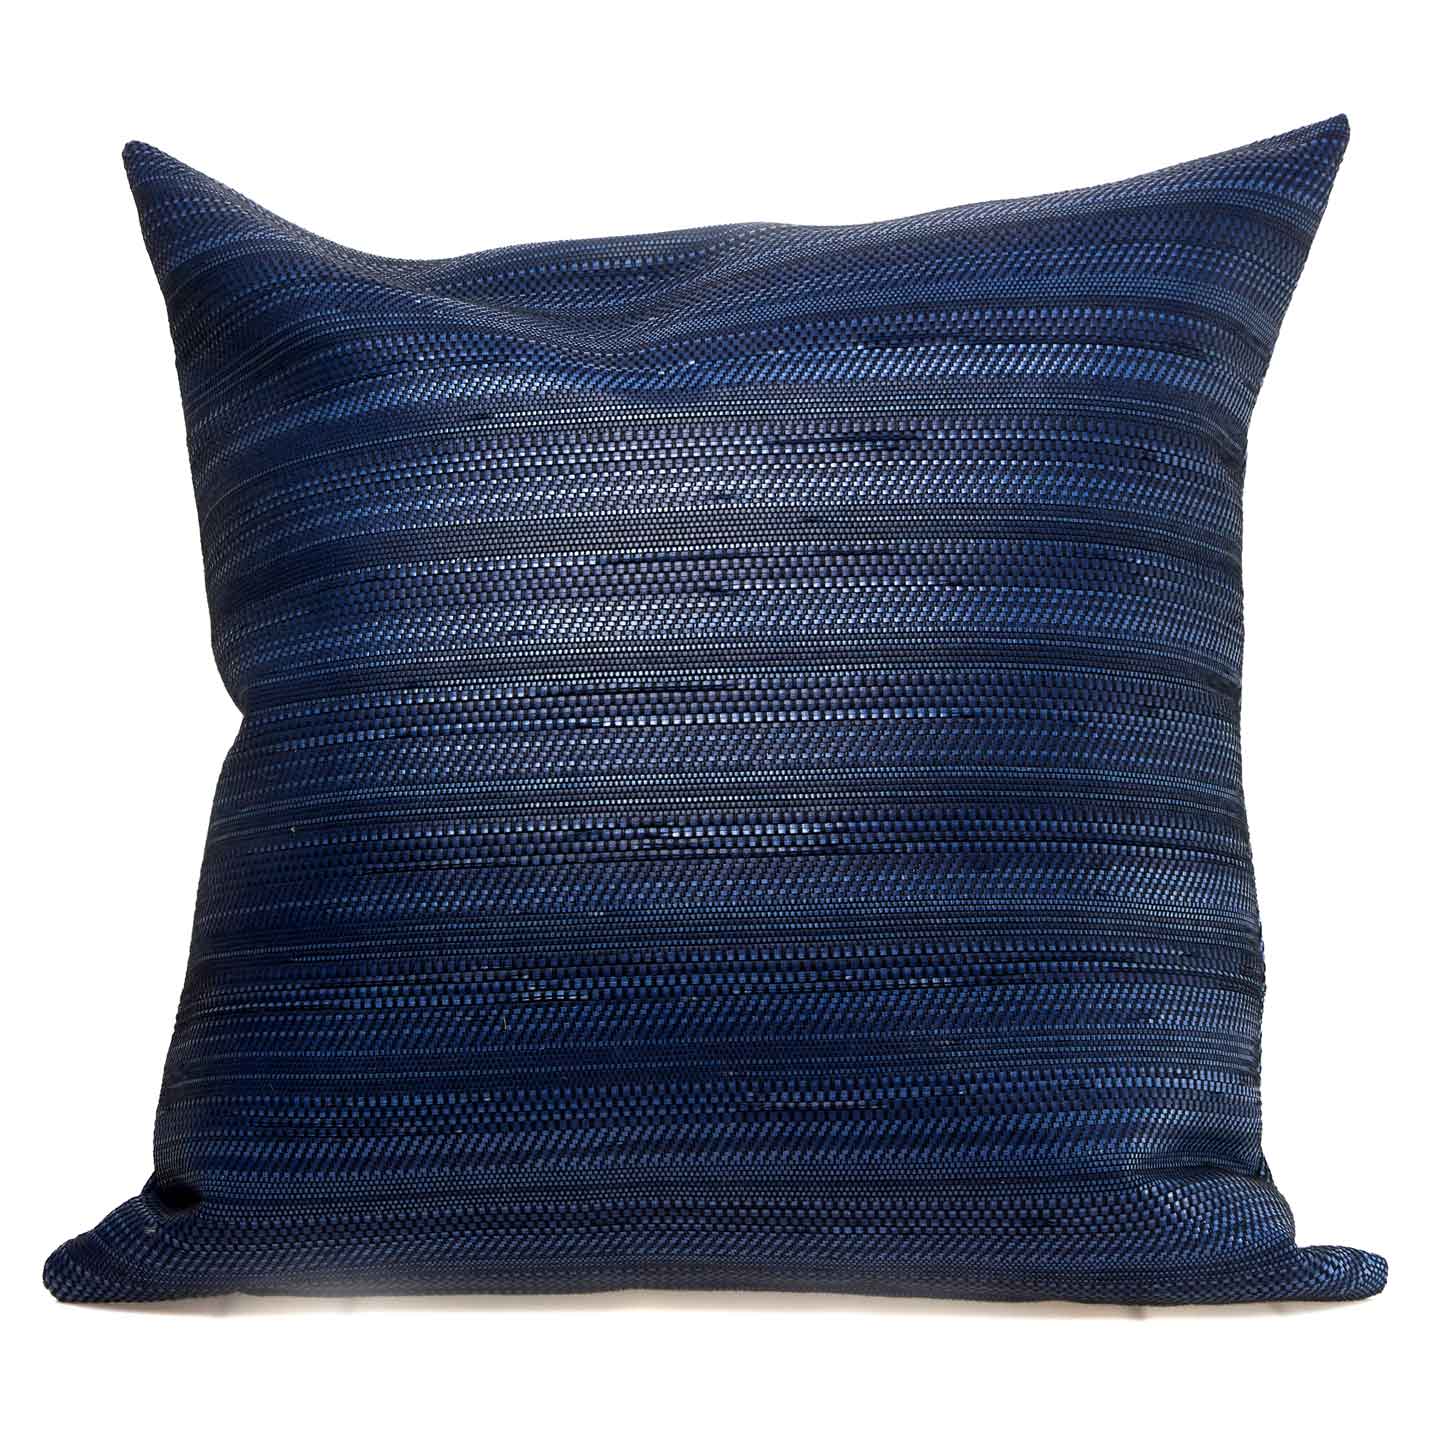 The Nancy pillow by Beau Home